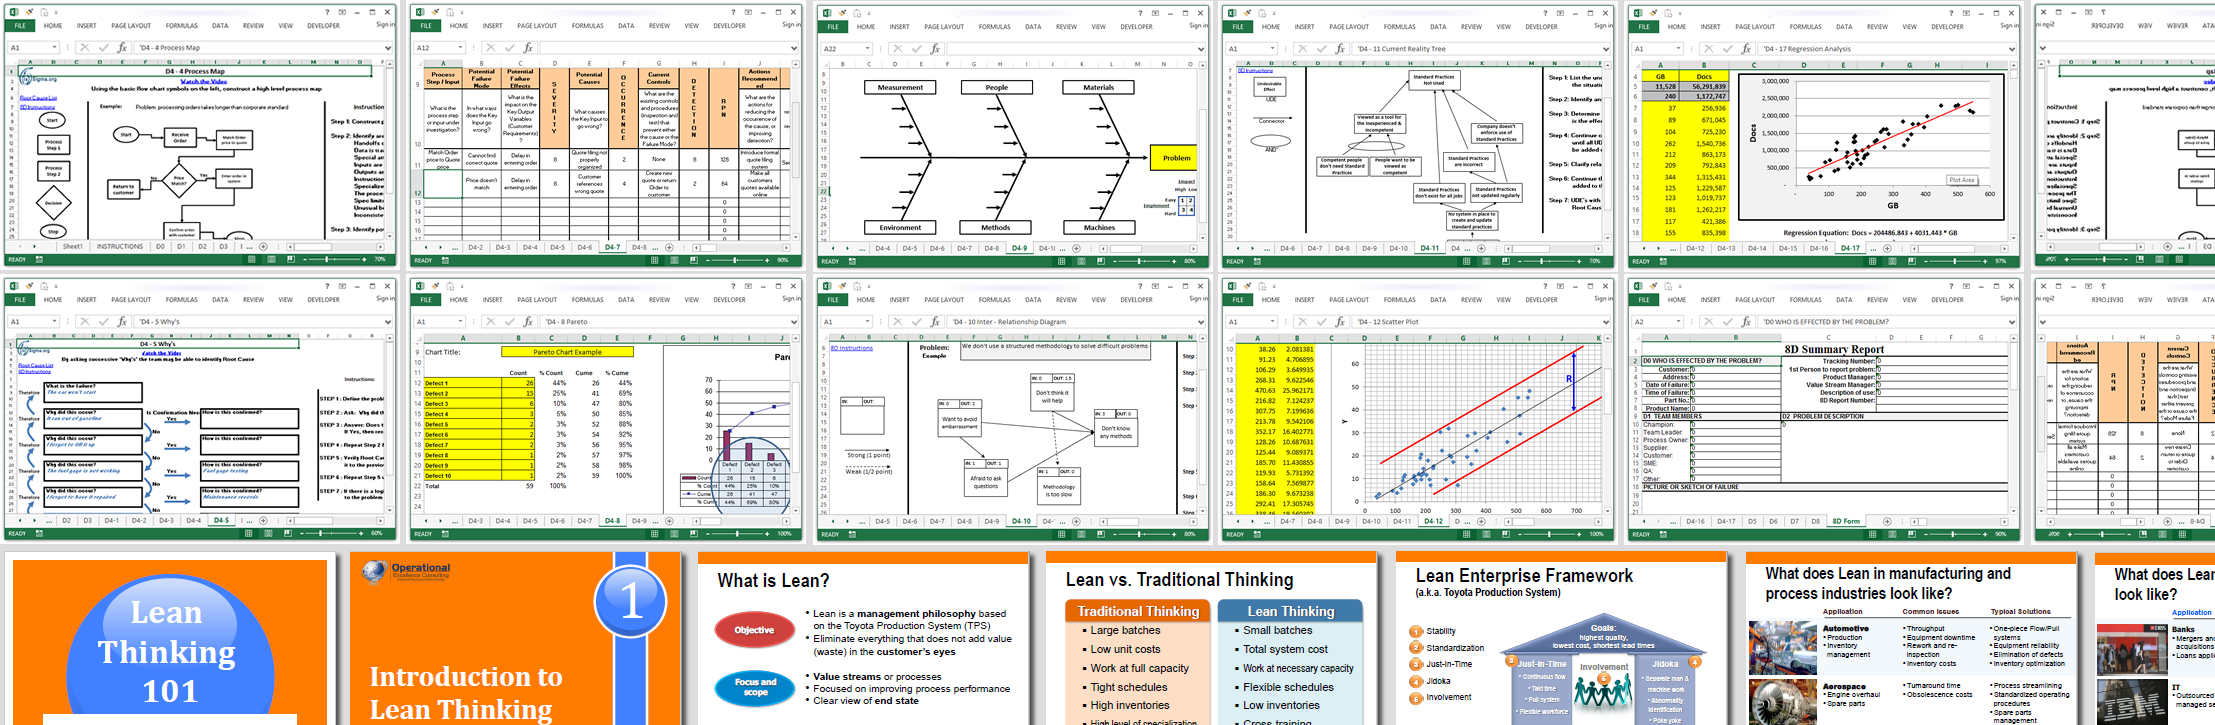 dmaic template excel